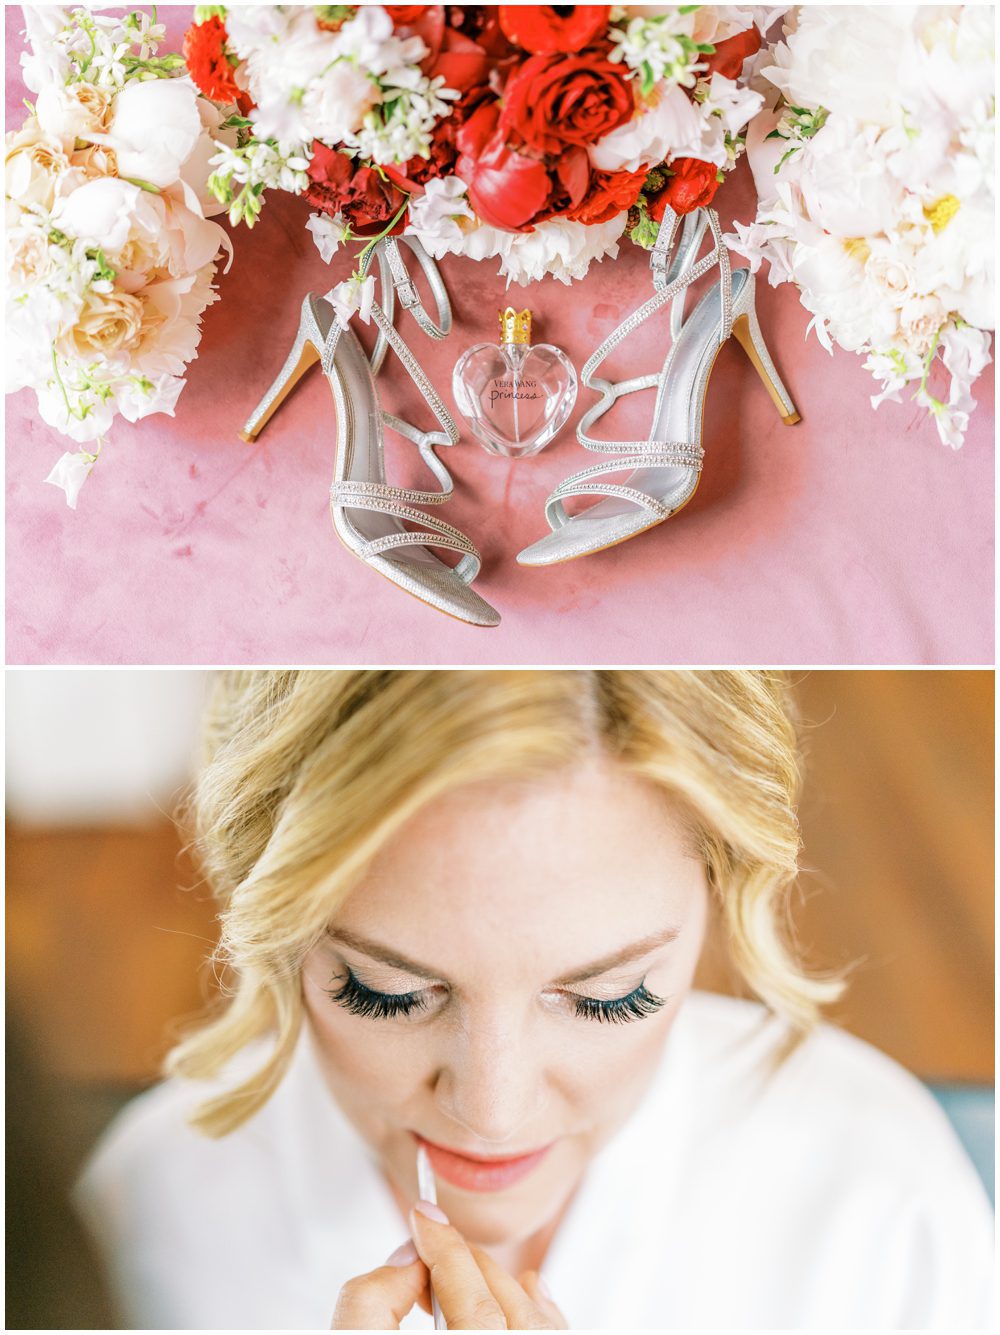 Red wedding flowers with pink peonies 